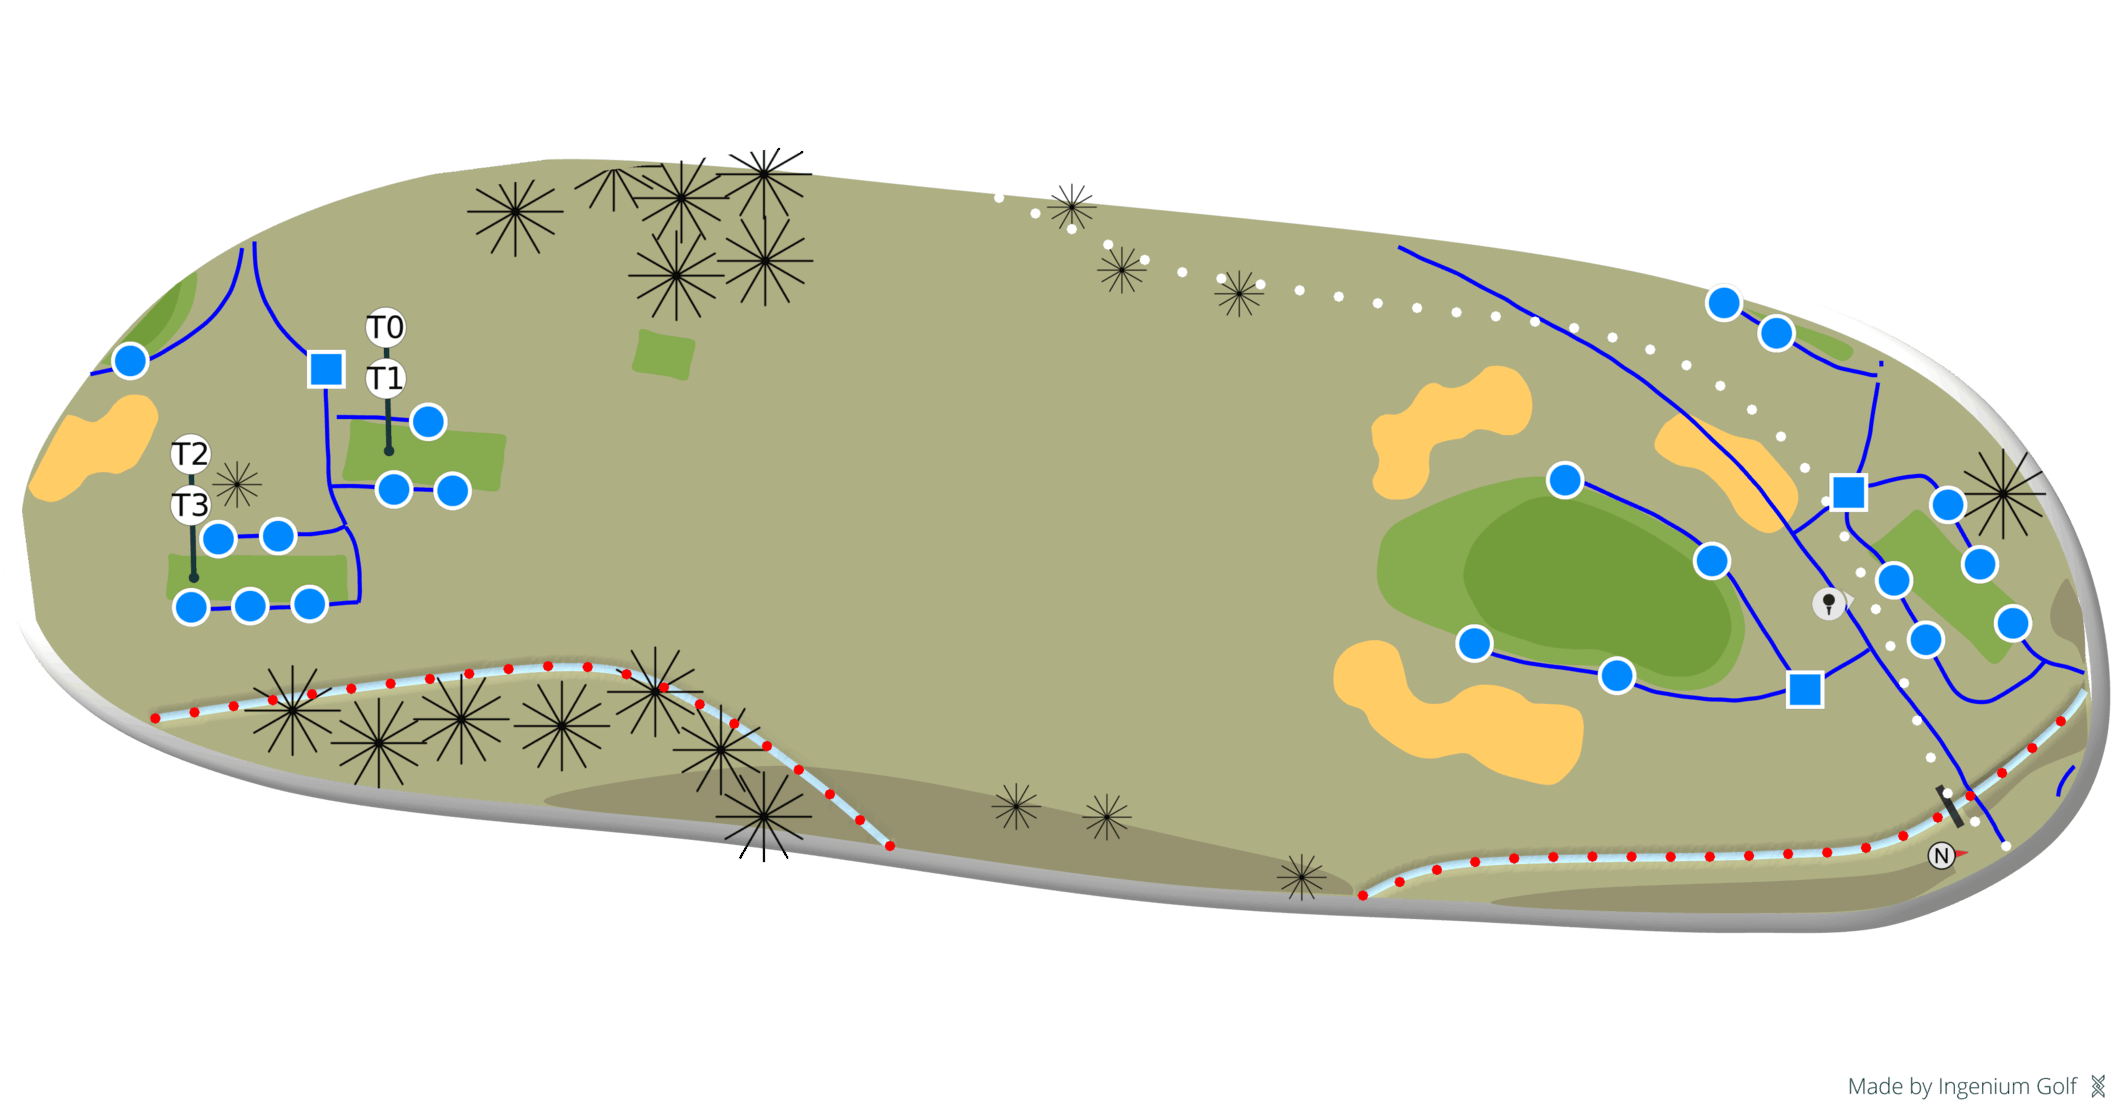 Technical layout of Cleydal GCC 14th hole